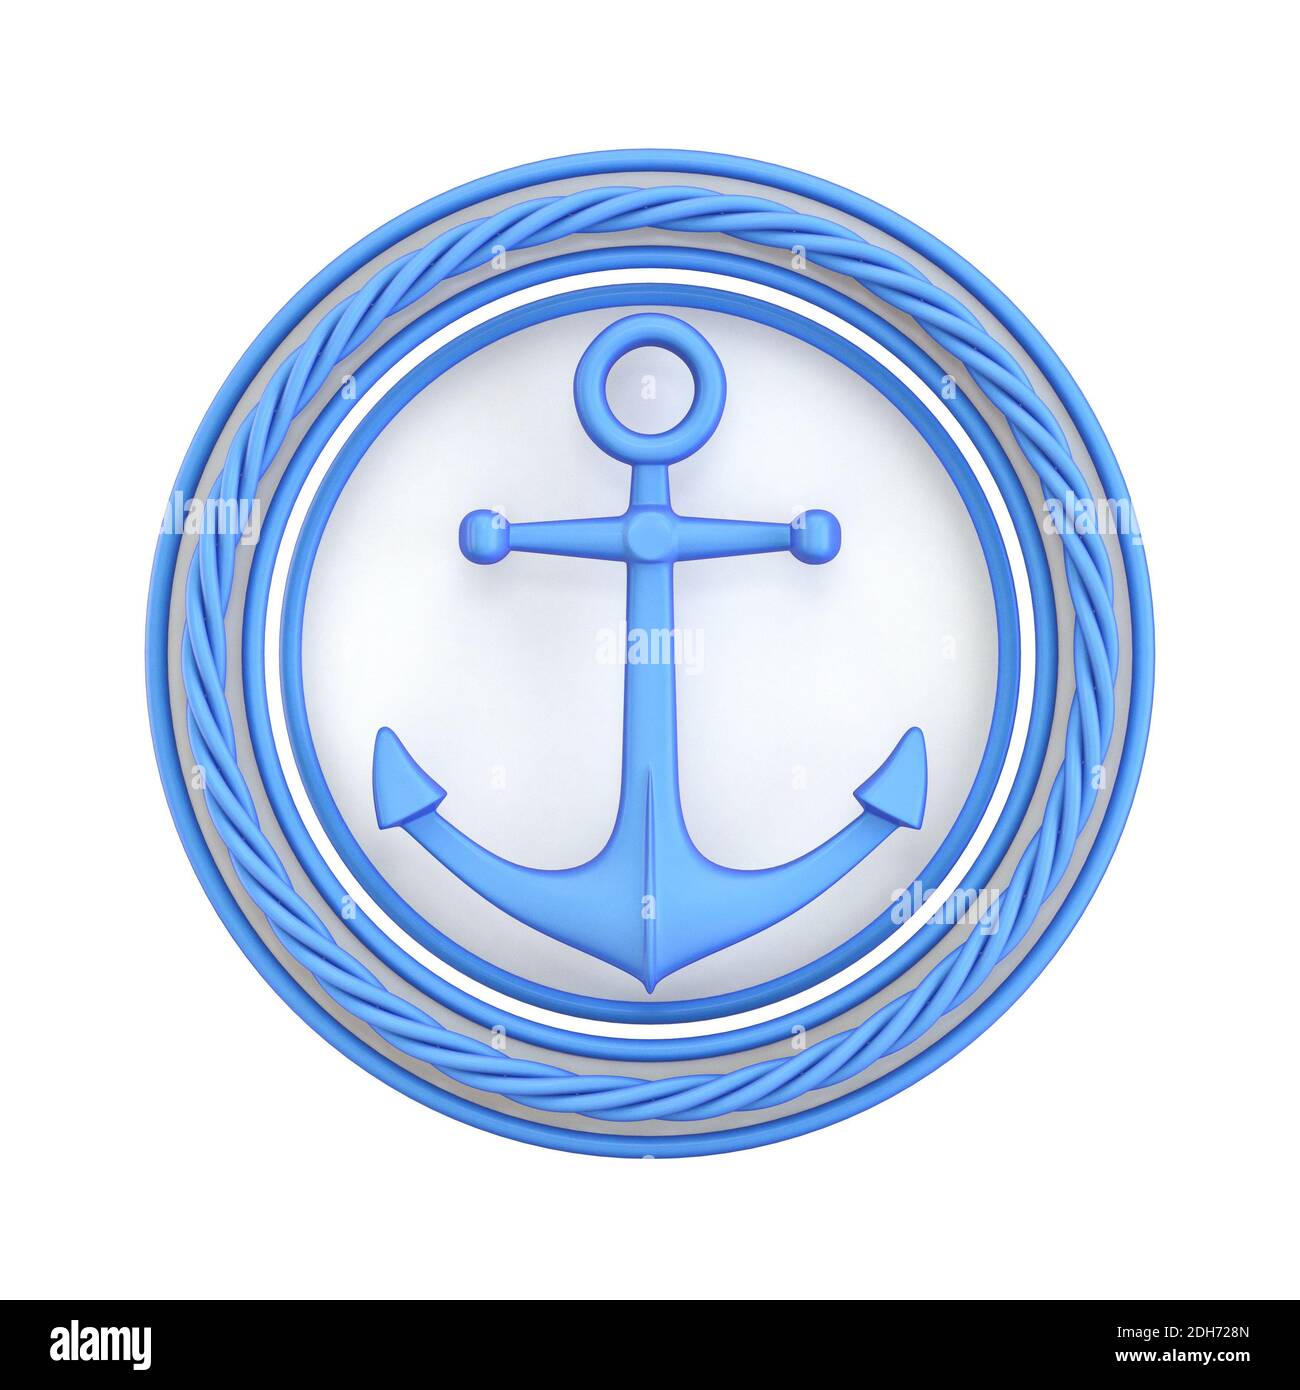 White blue anchor, circle and rope 3D Stock Photo